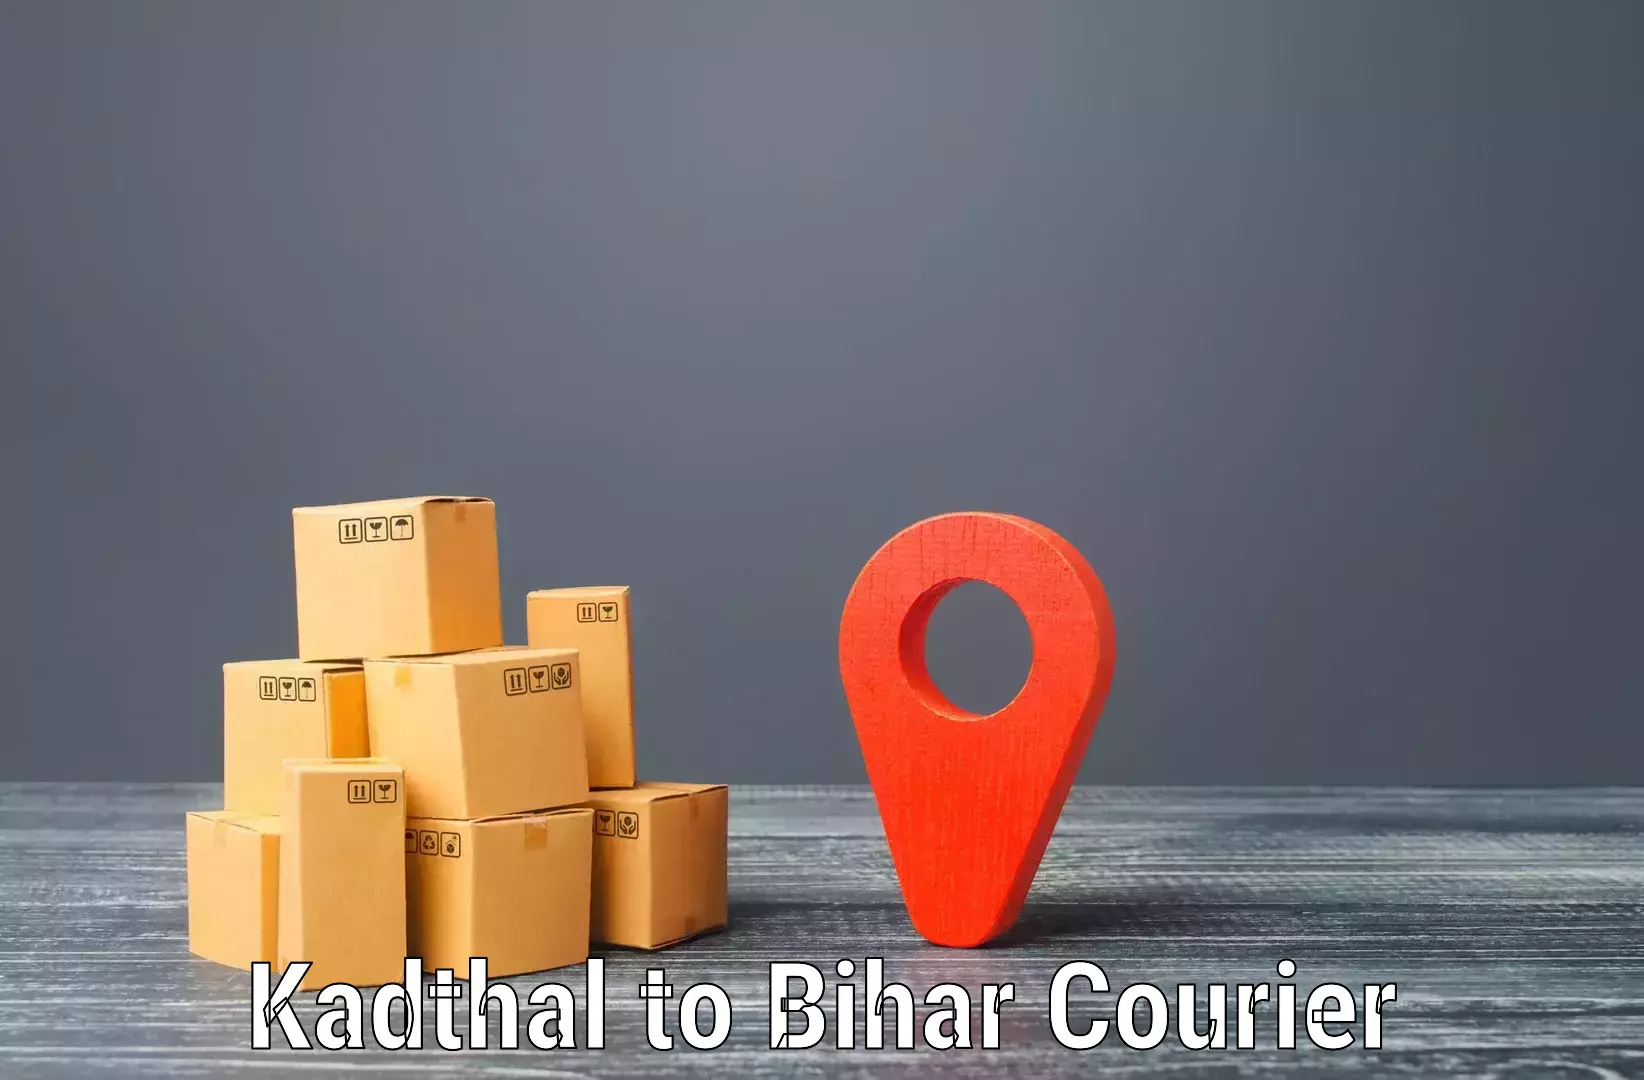 Personalized courier experiences Kadthal to Dighwara